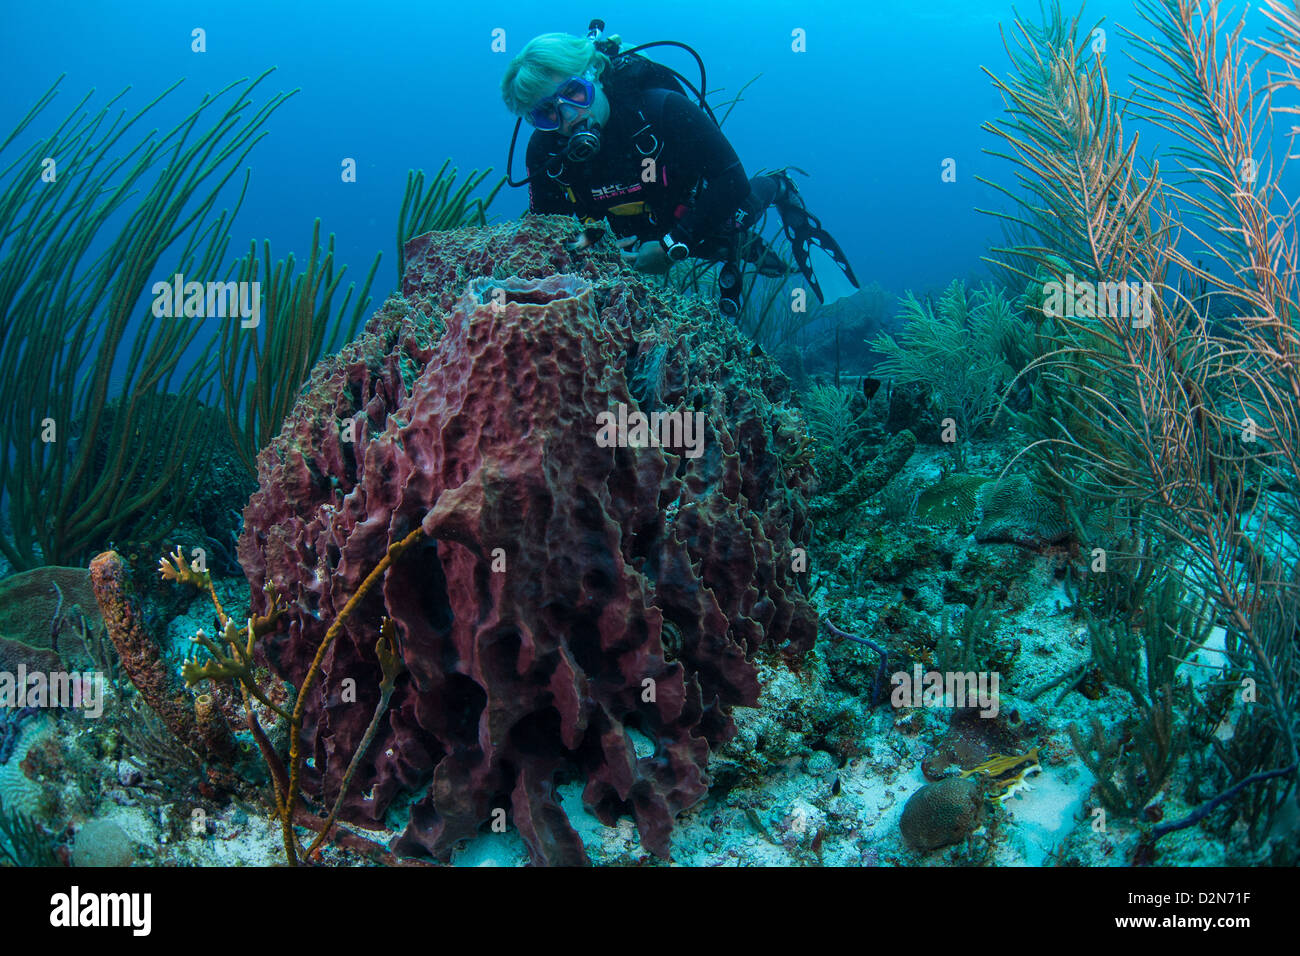 Diver in the crystal clear Caribbean waters of Curacao Stock Photo